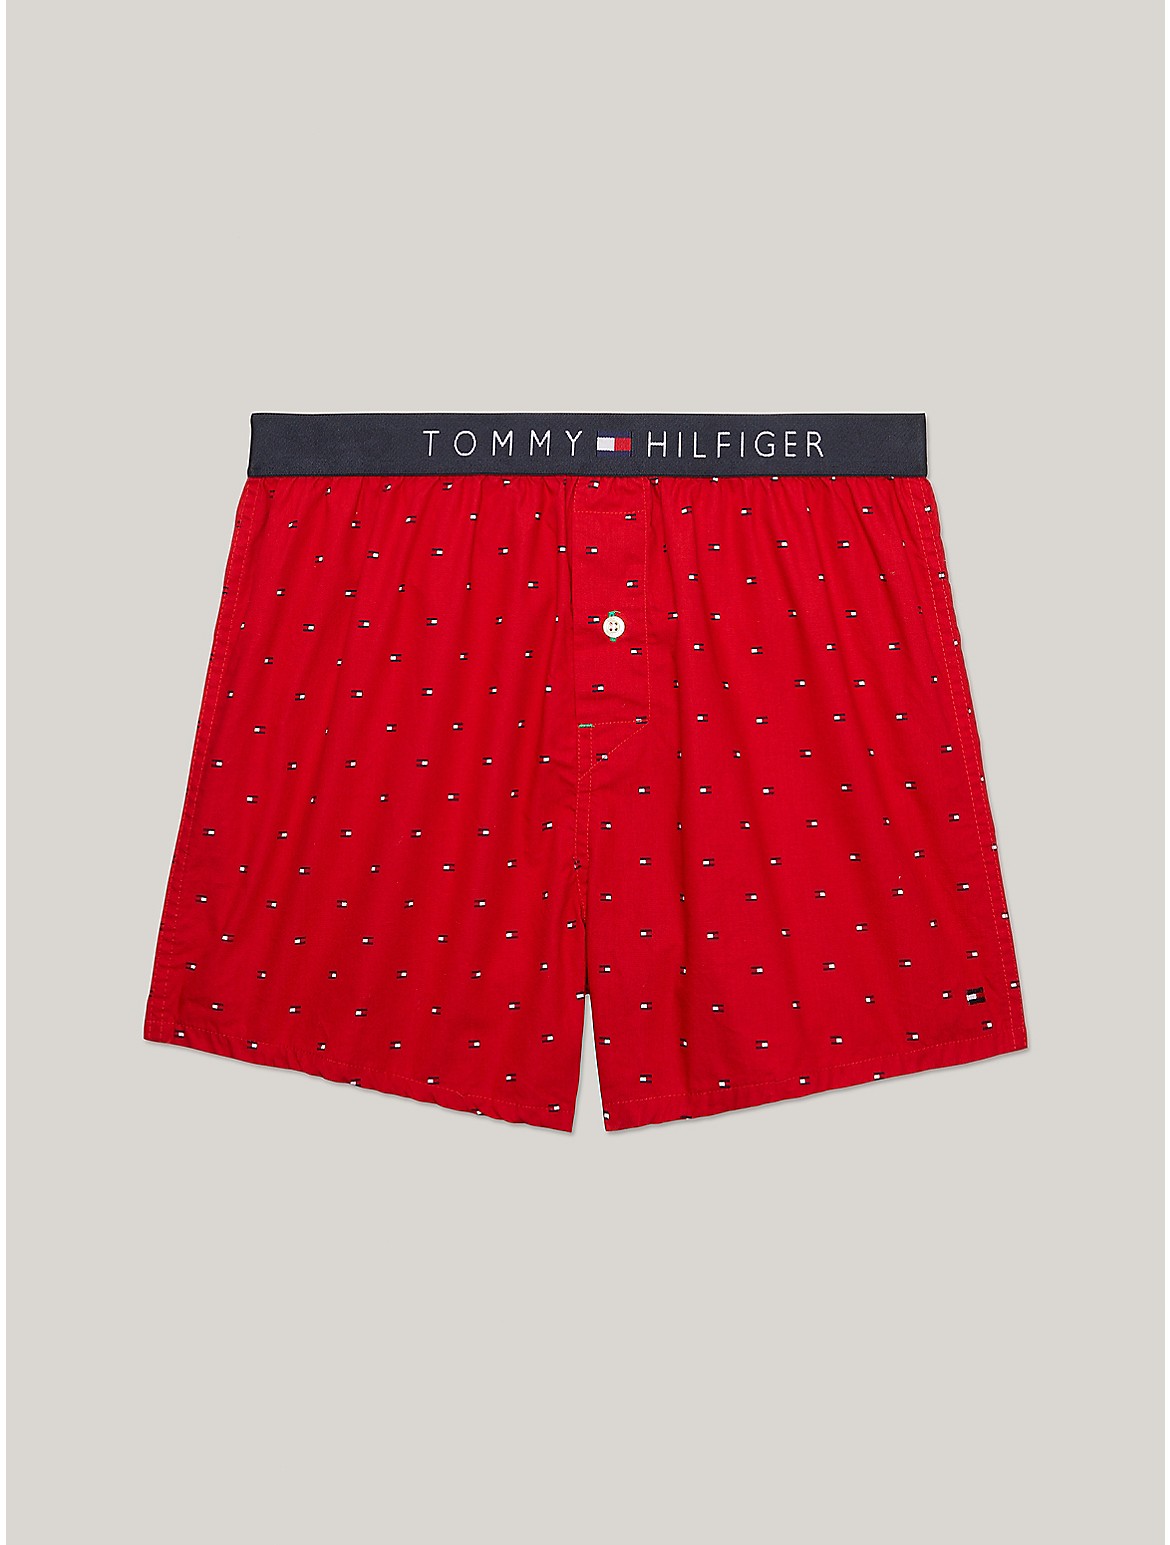 Shop Tommy Hilfiger Slim Fit Fashion Woven Boxer In Mahogany